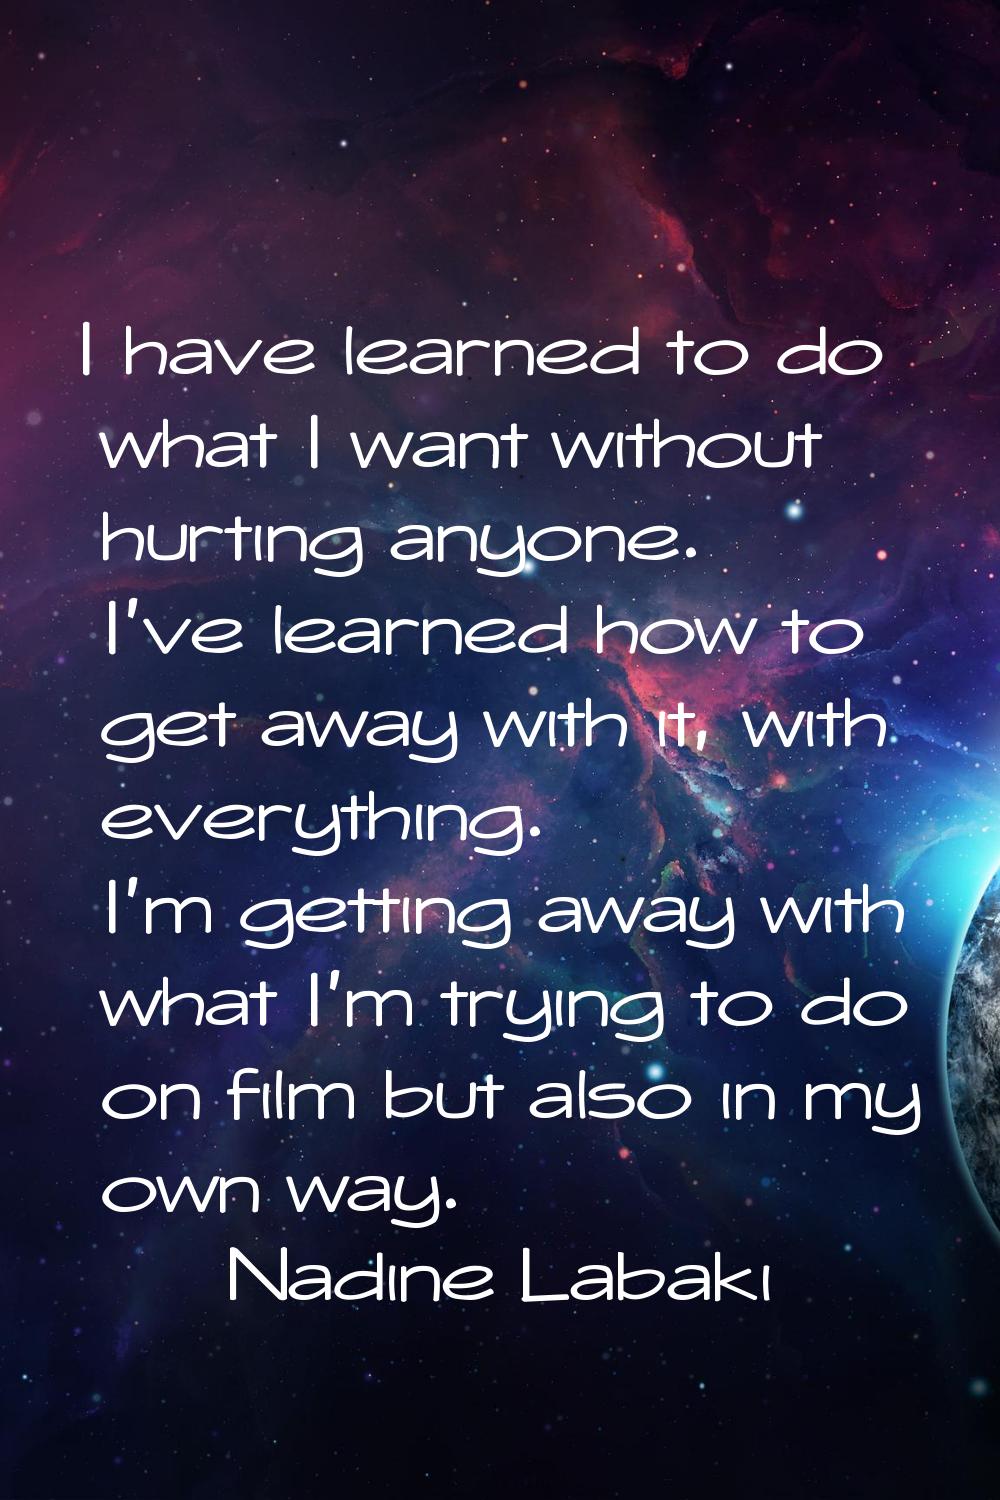 I have learned to do what I want without hurting anyone. I've learned how to get away with it, with